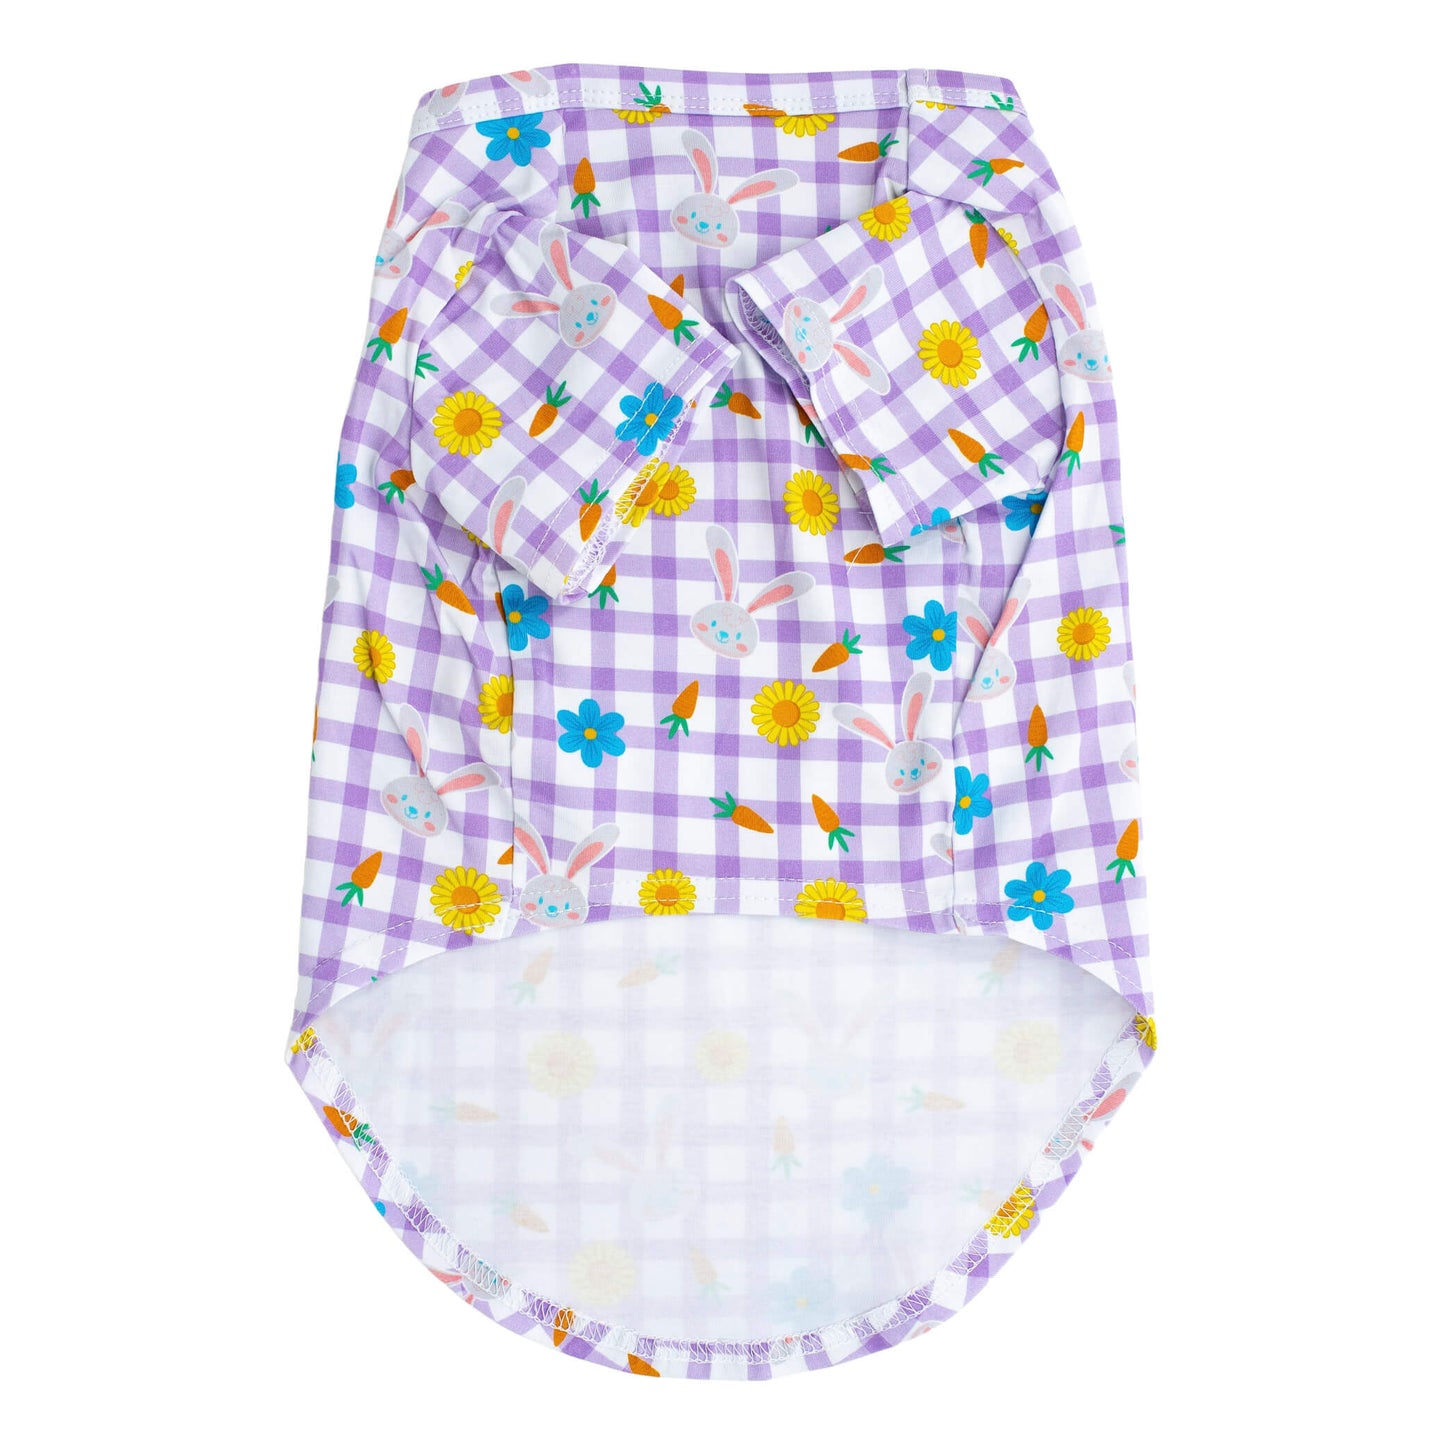 Front flat lay of Vibrant Hounds Hoppy Easter shirt for dogs. It has a purple gingham background with Easter bunnies, carrots, and sunflowers printed on the front.